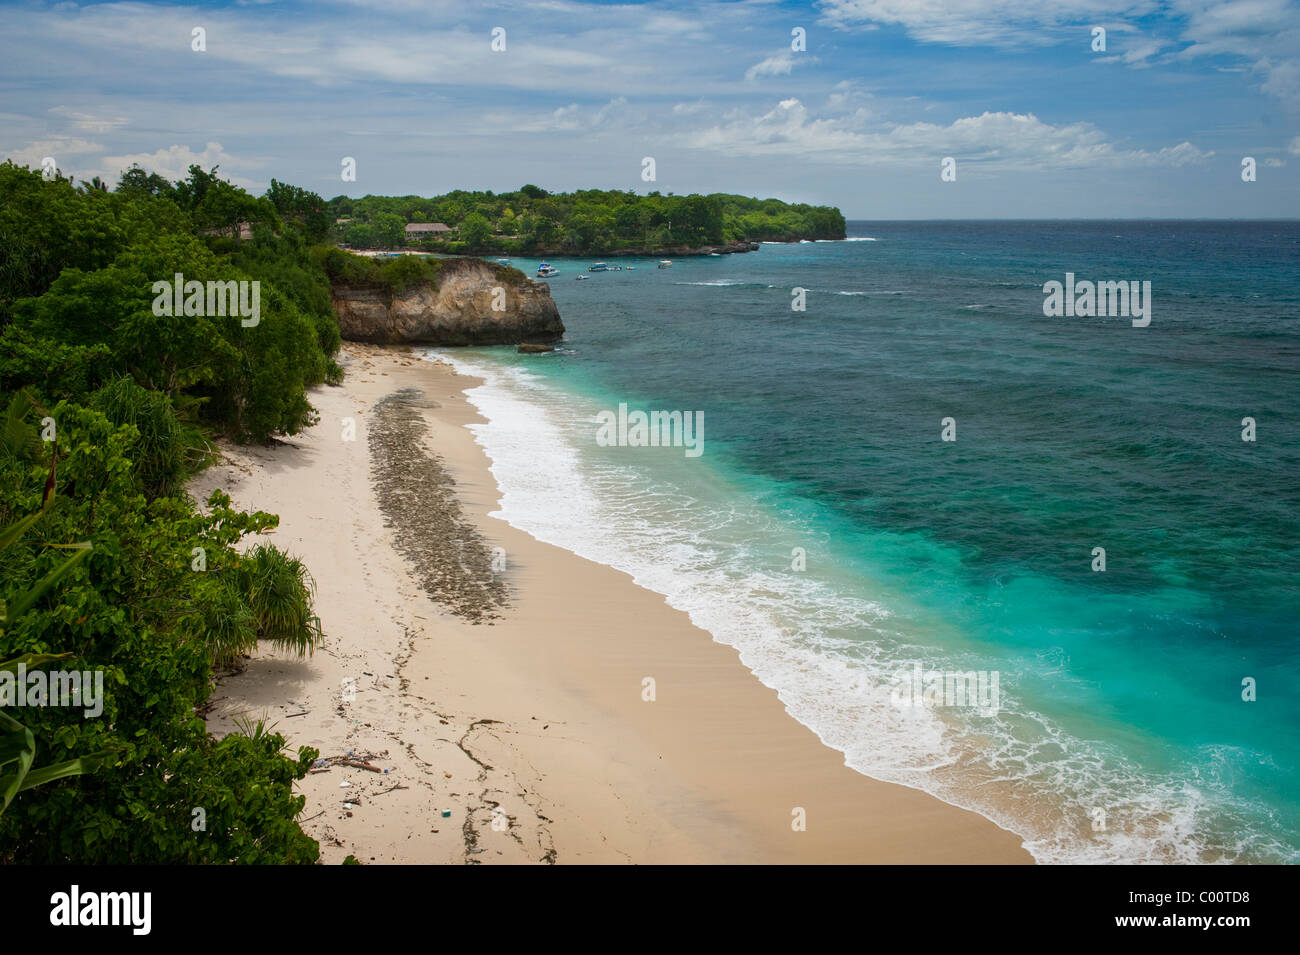 Mushroom Bay is a beautiful secluded white sand beach on Nusa Lembongan, a short distance from mainland Bali, Indonesia. Stock Photo